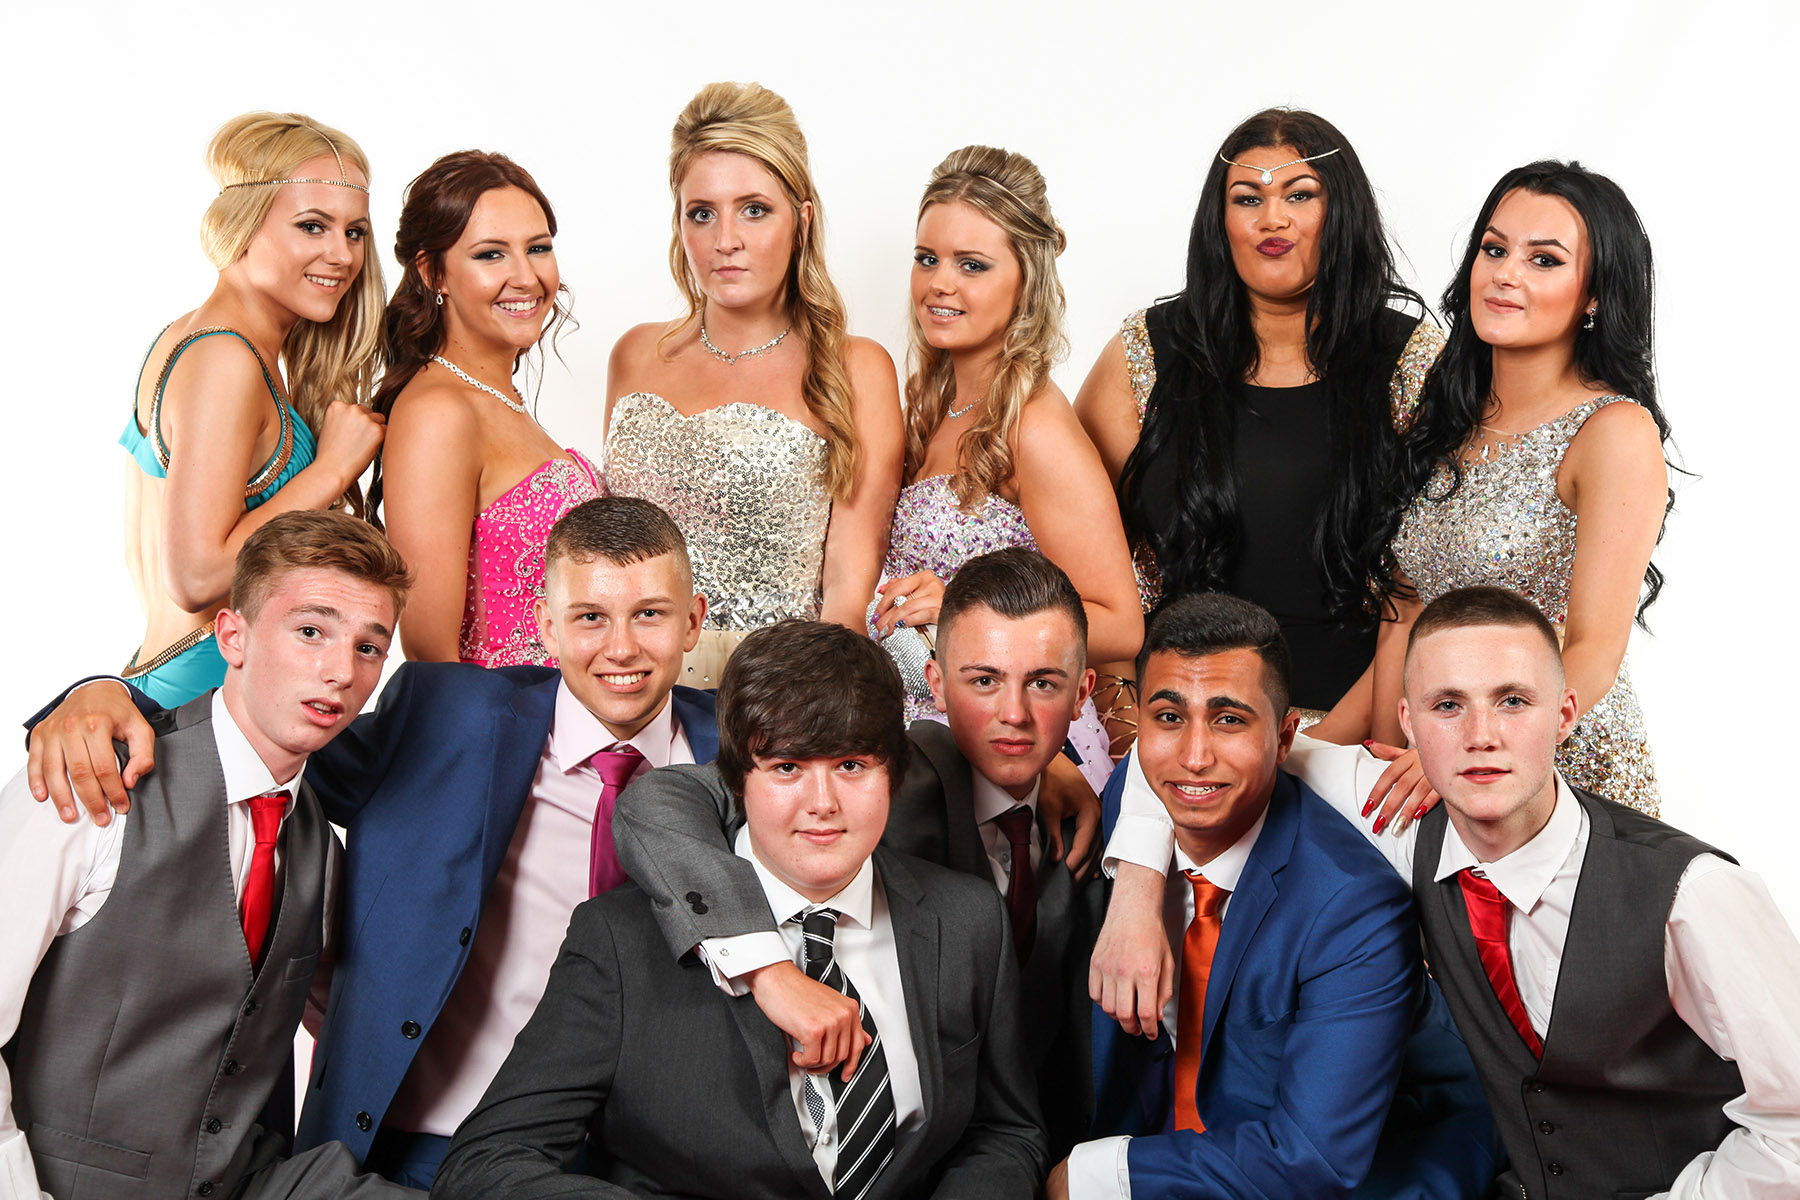 group prom photograph